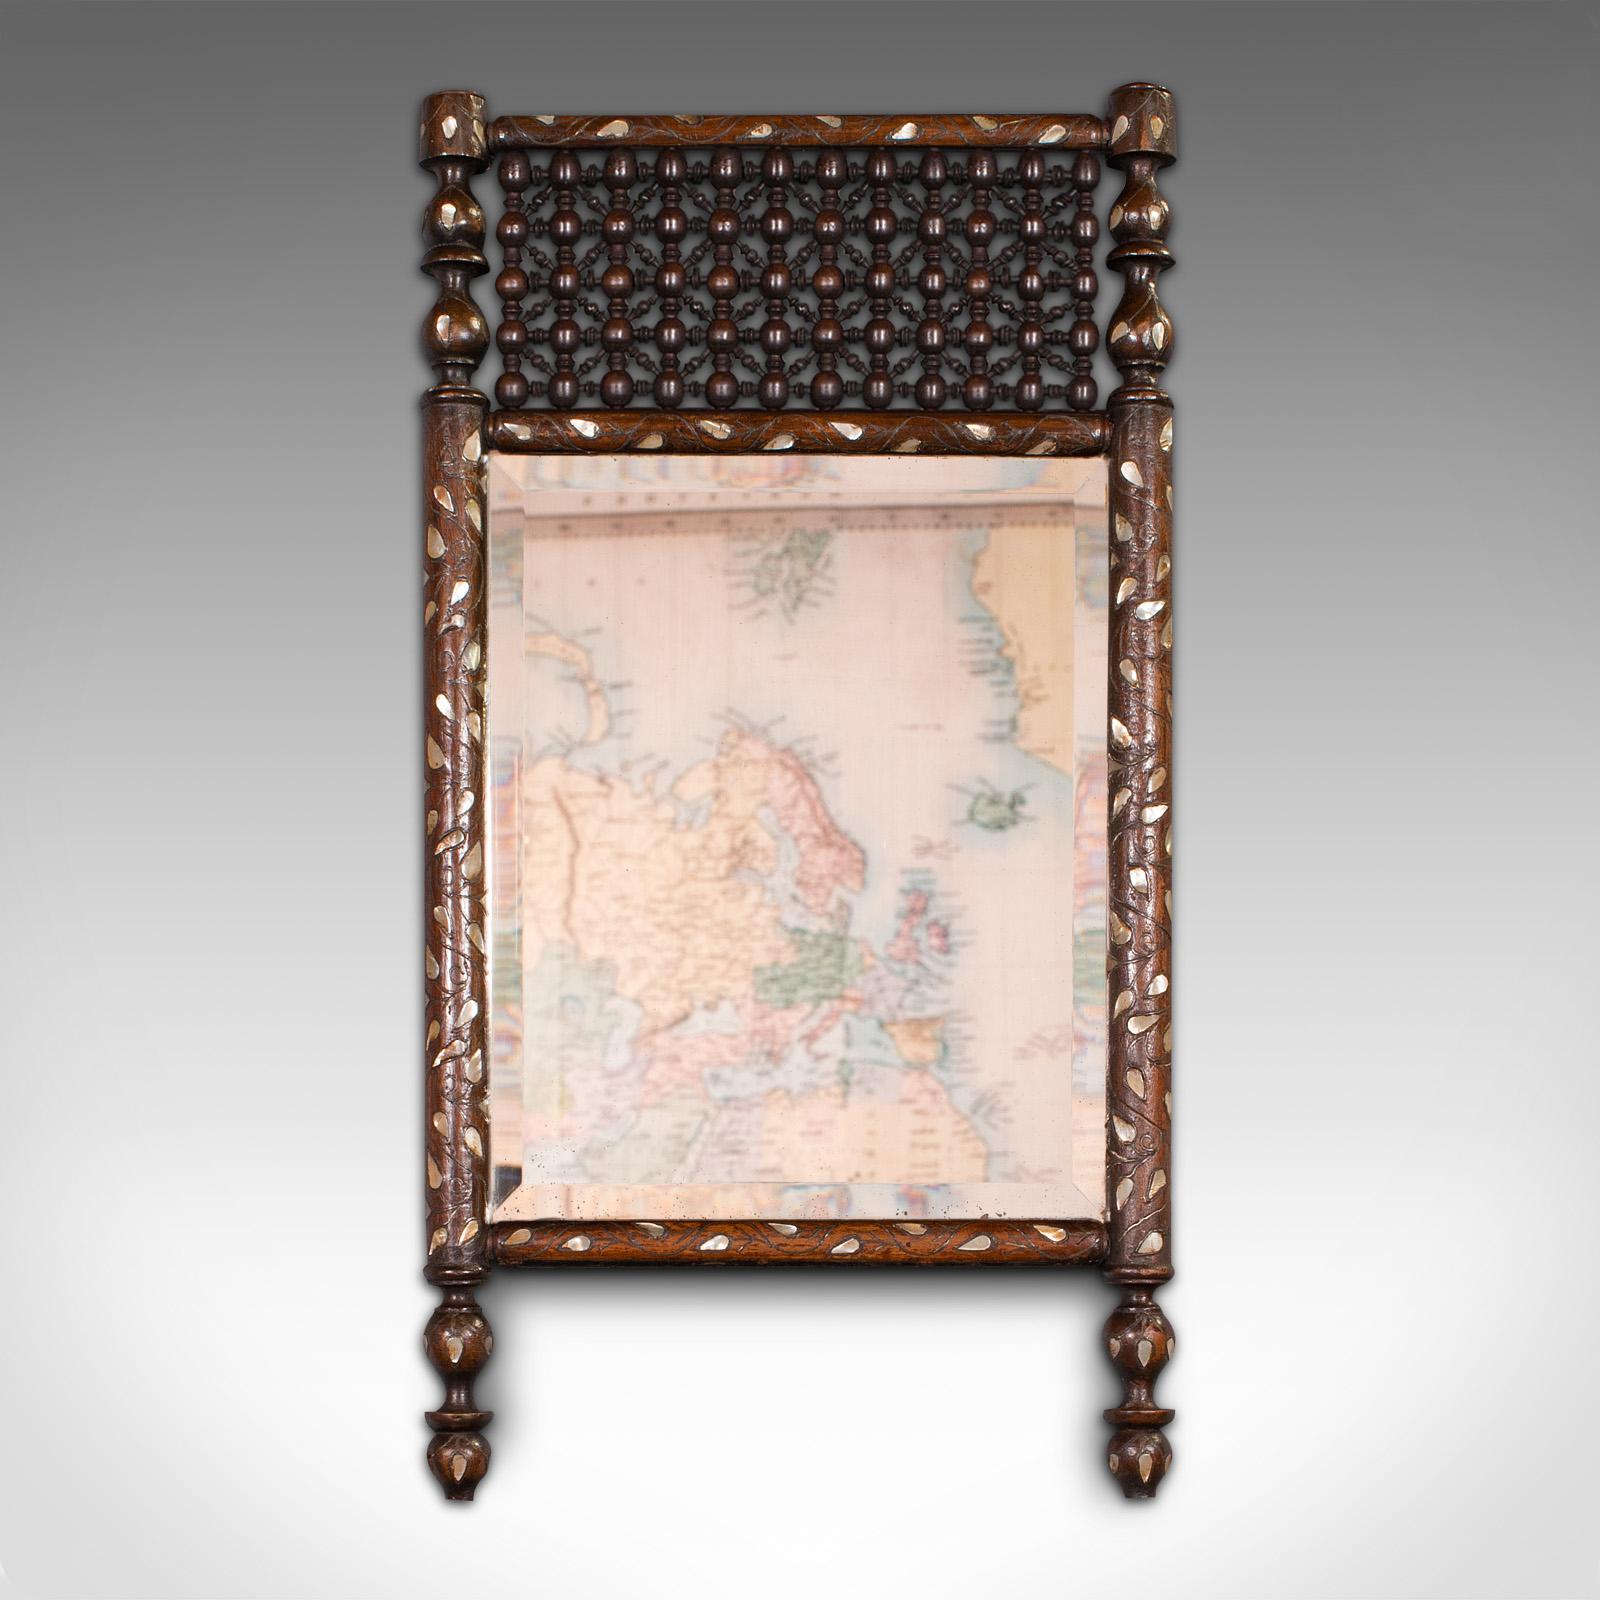 This is an antique decorative wall mirror. An Indian, mahogany and glass colonial mirror, dating to the late Victorian period, circa 1900.

Of unusual form and decorative finish
Displaying a desirable aged patina throughout
Select stocks accentuated